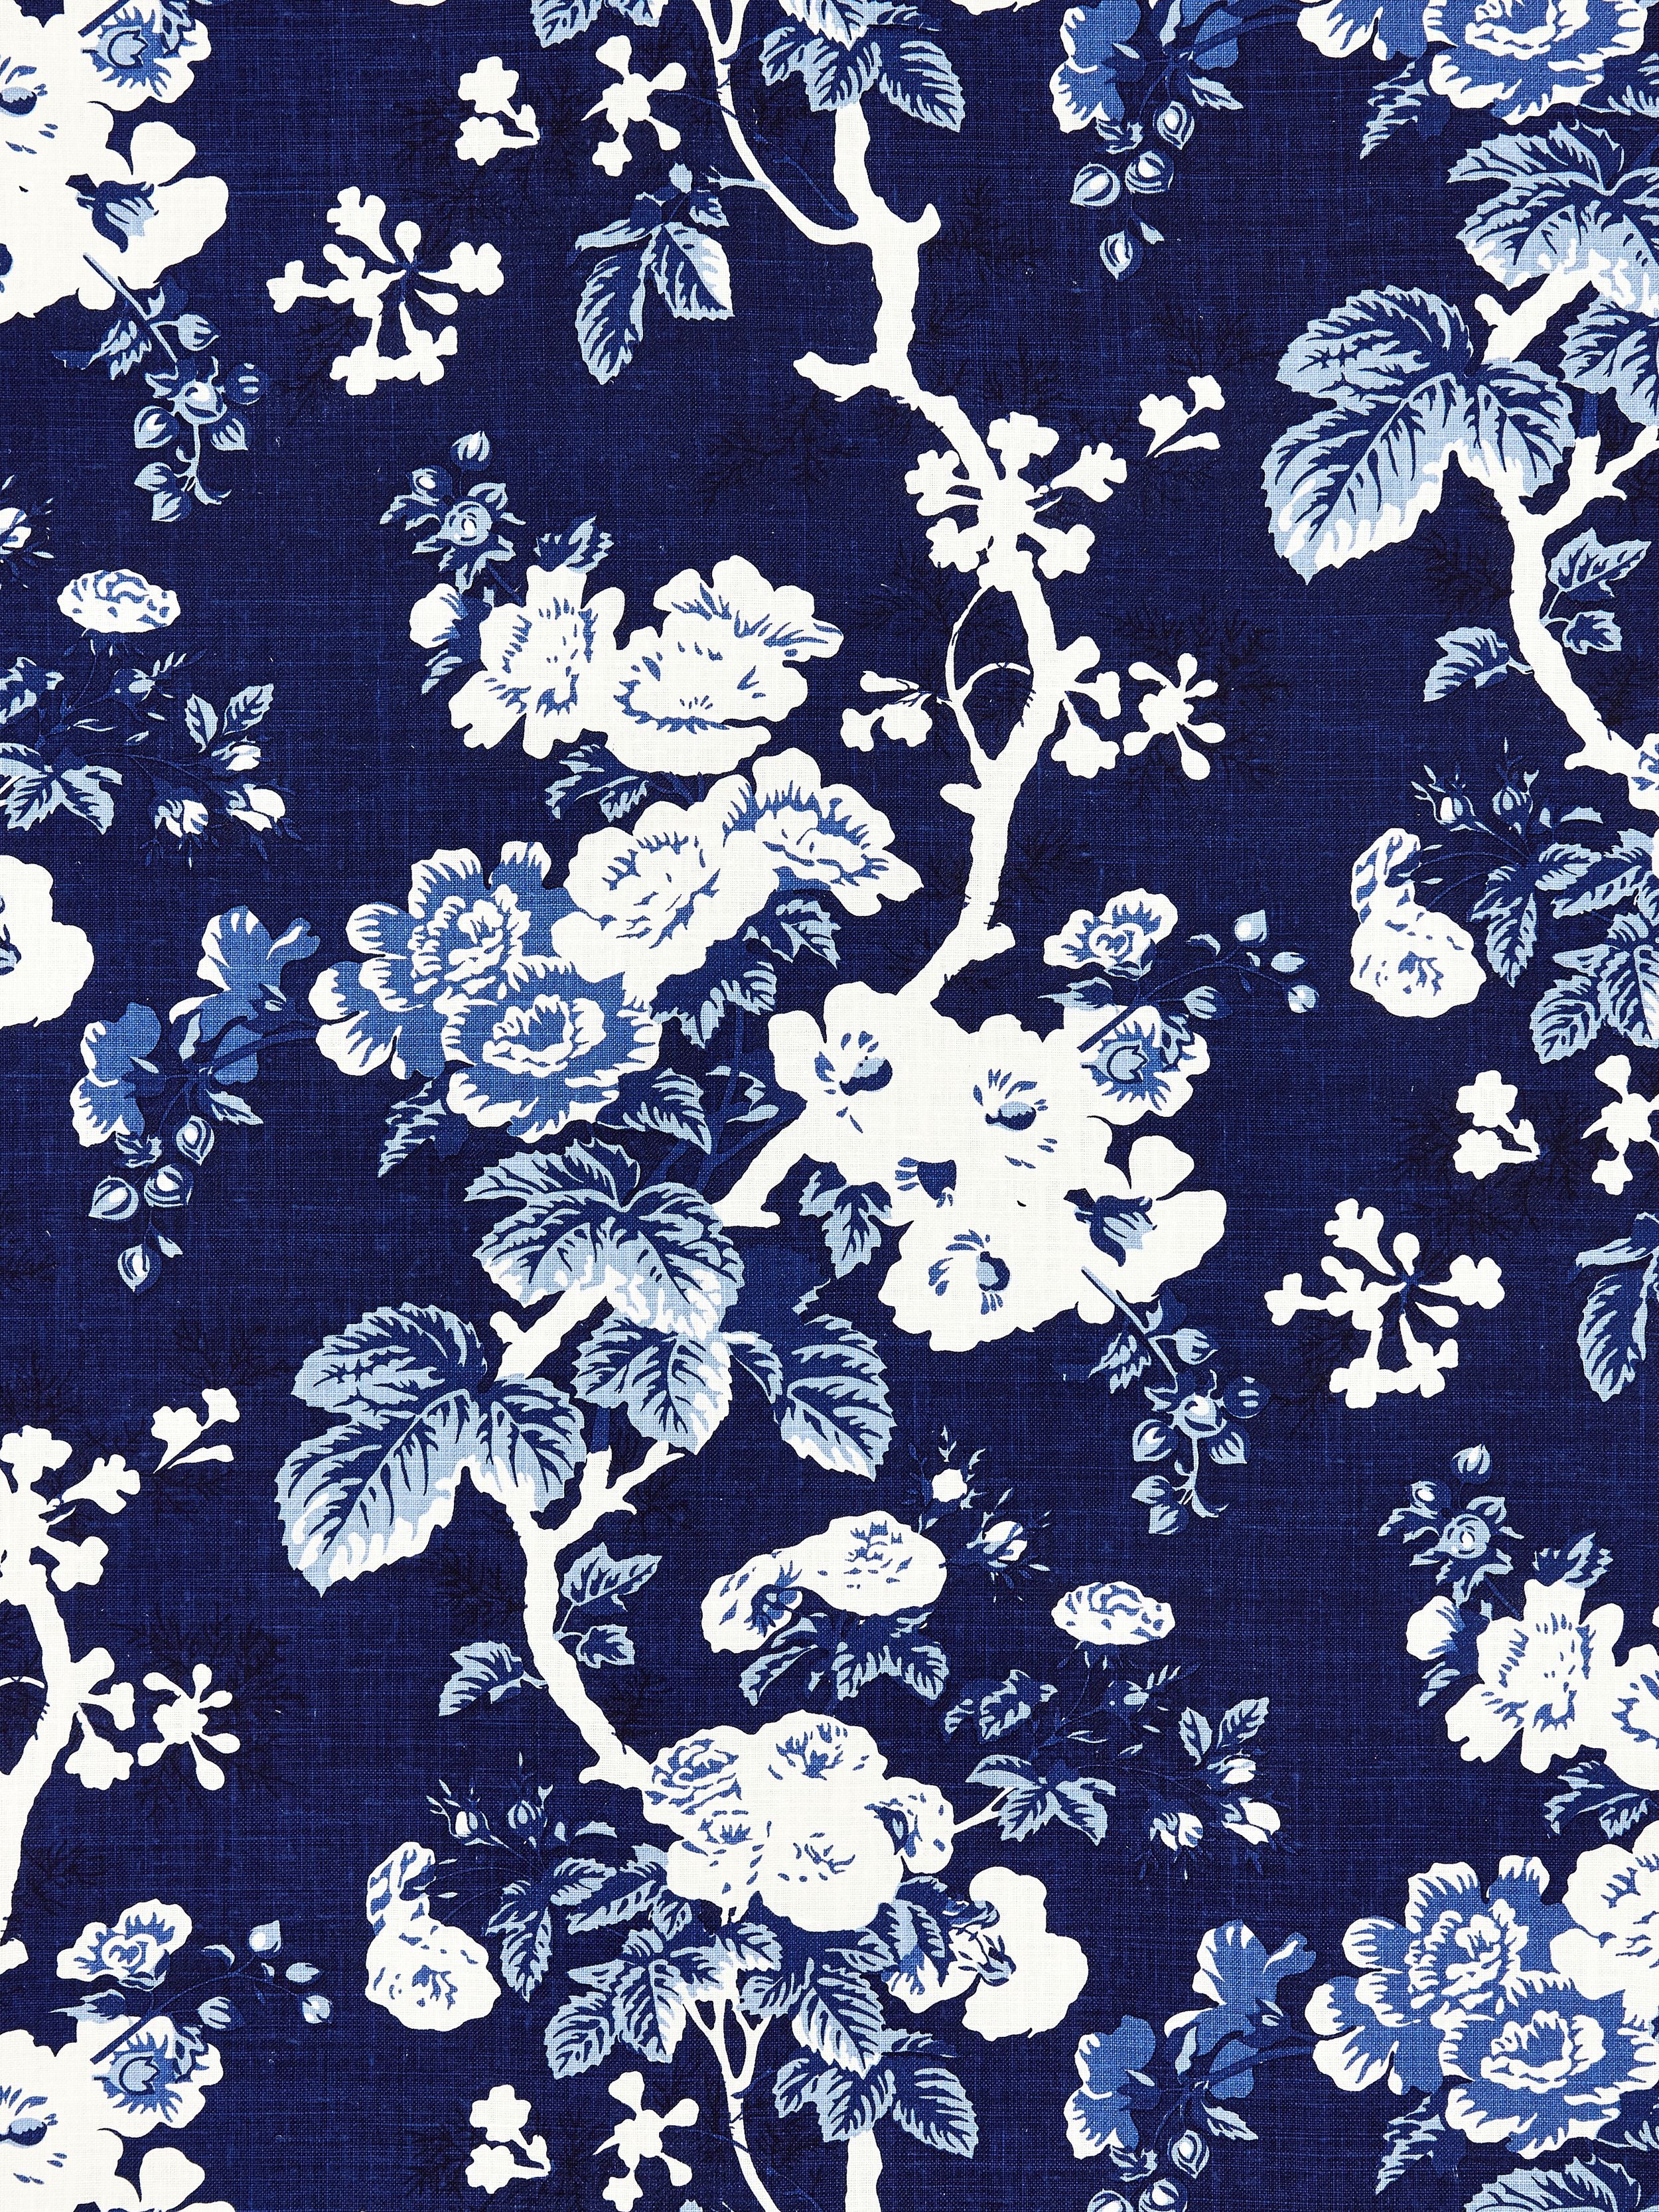 Ascot Linen Print fabric in indigo color - pattern number SC 000416602 - by Scalamandre in the Scalamandre Fabrics Book 1 collection